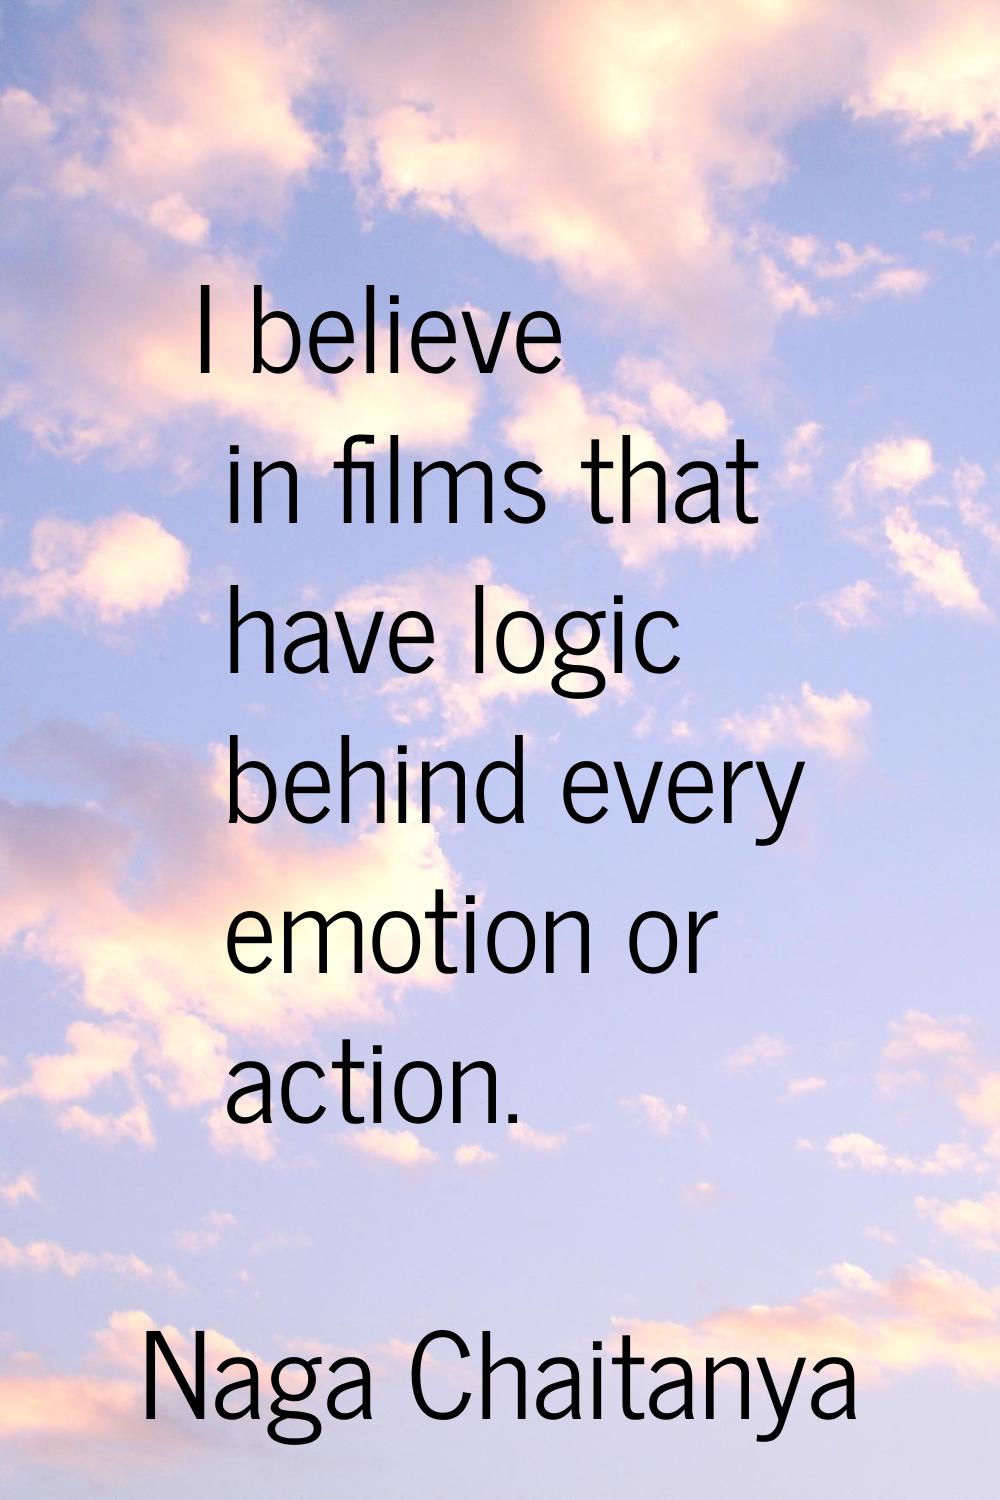 I believe in films that have logic behind every emotion or action.